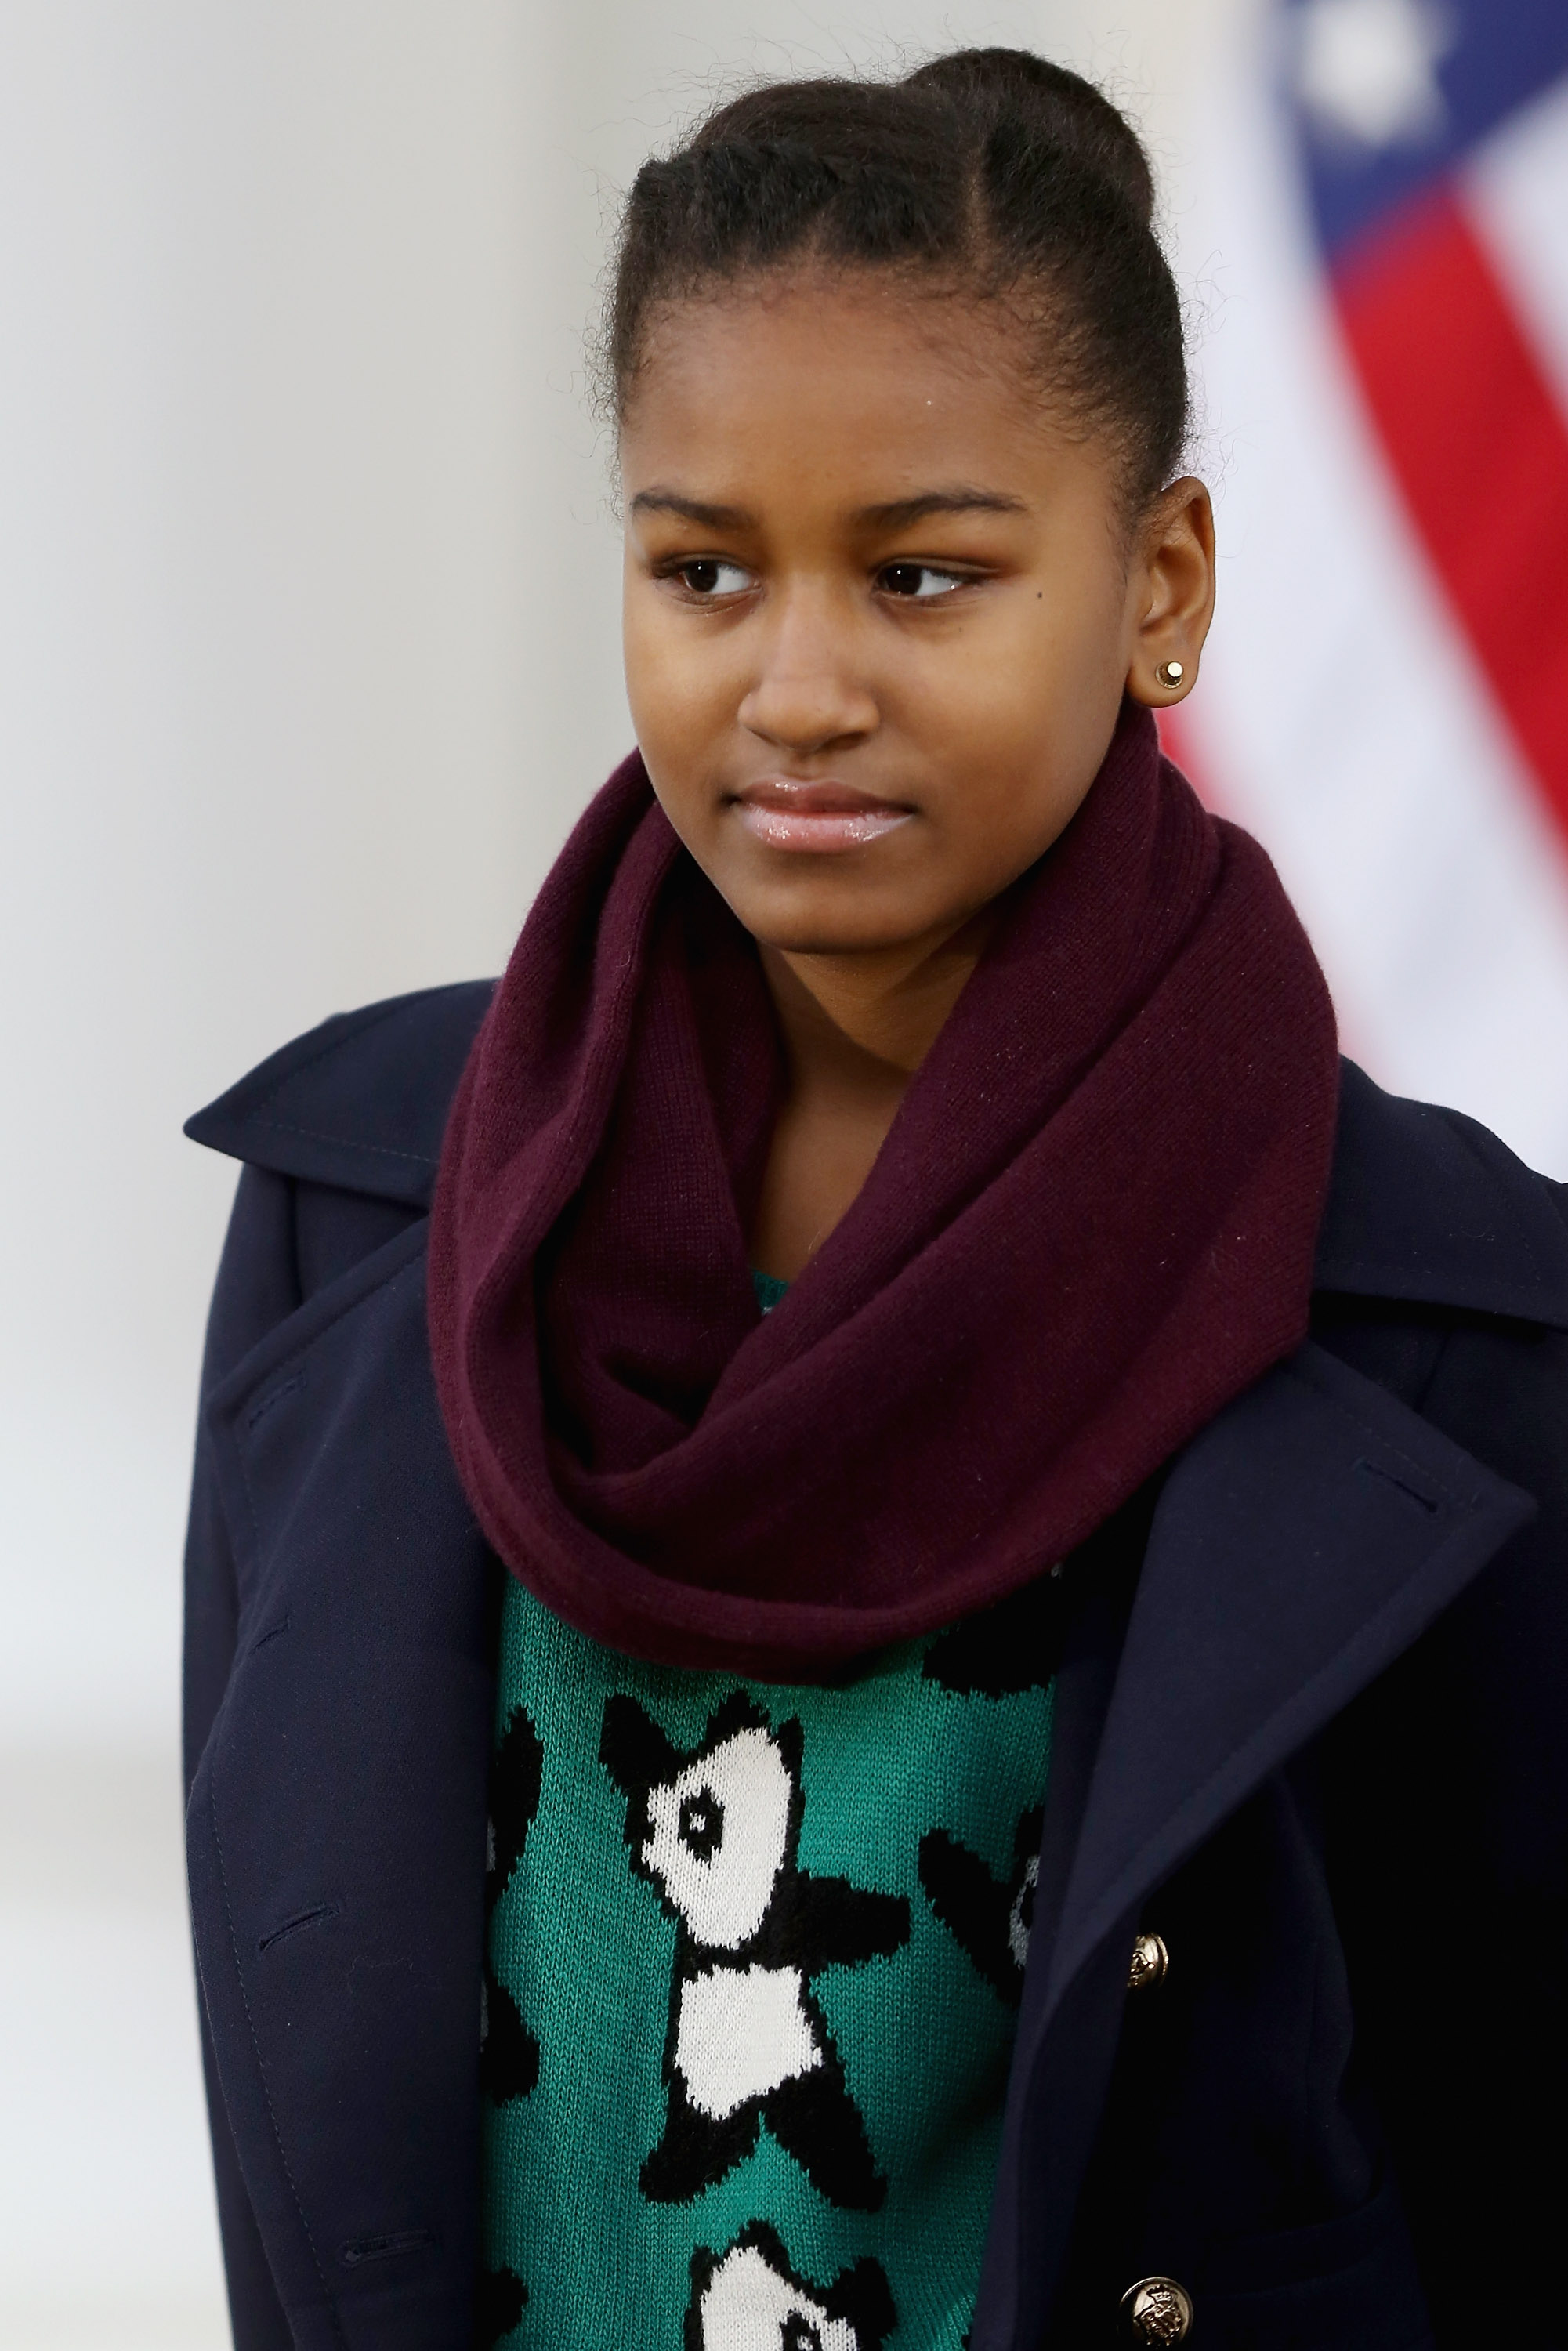 Sasha Obama in the White House in Washington D.C. on November 27, 2013 | Source: Getty Images